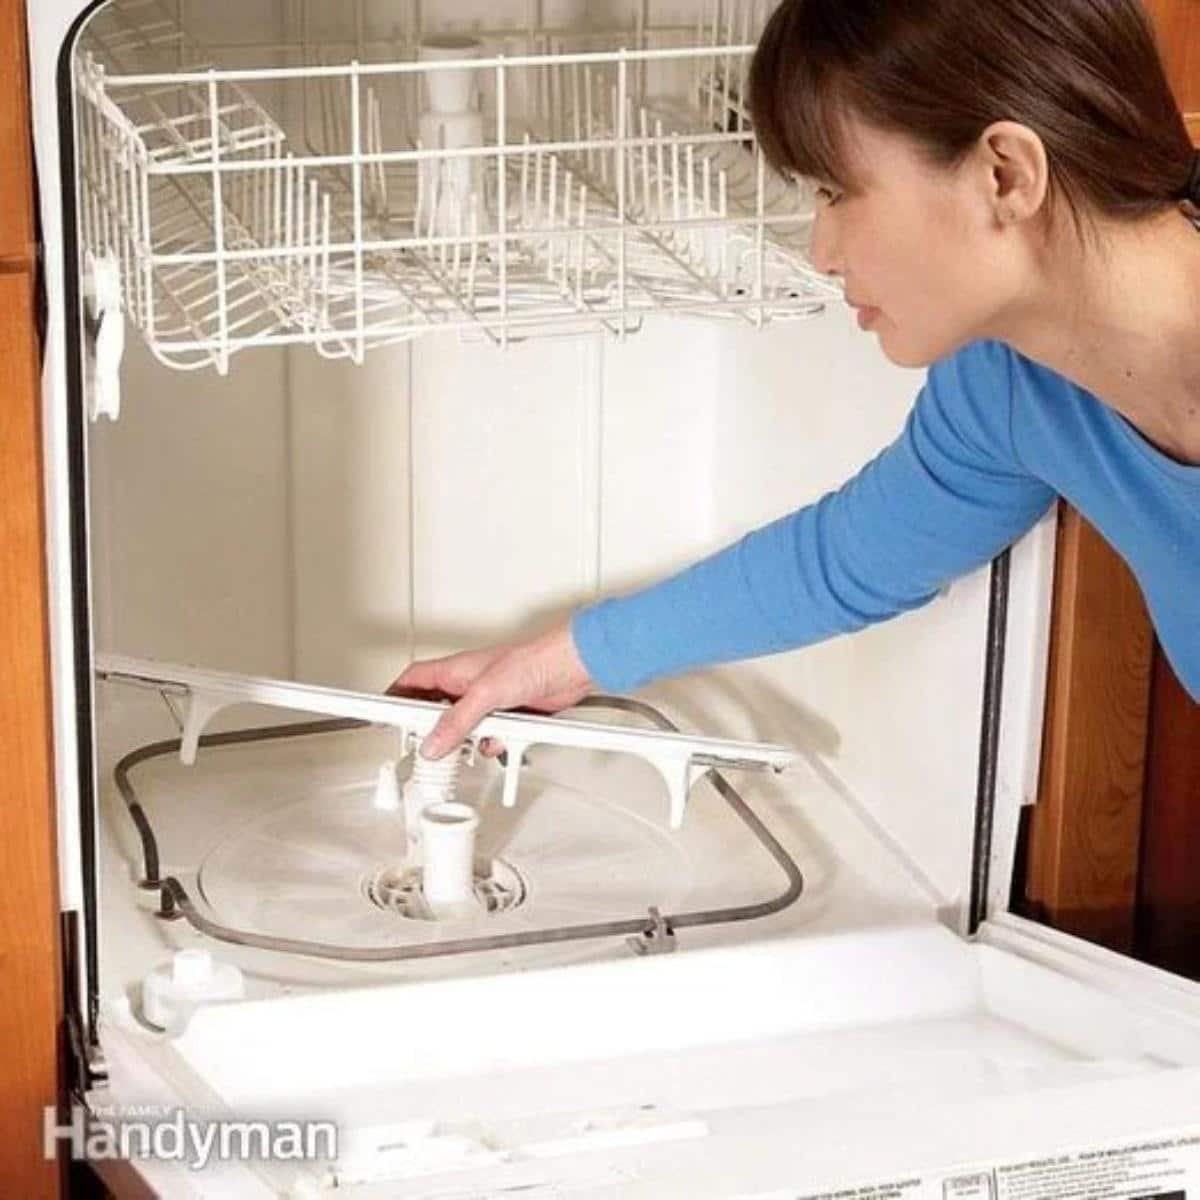 A woman is cleaning a dishwasher.